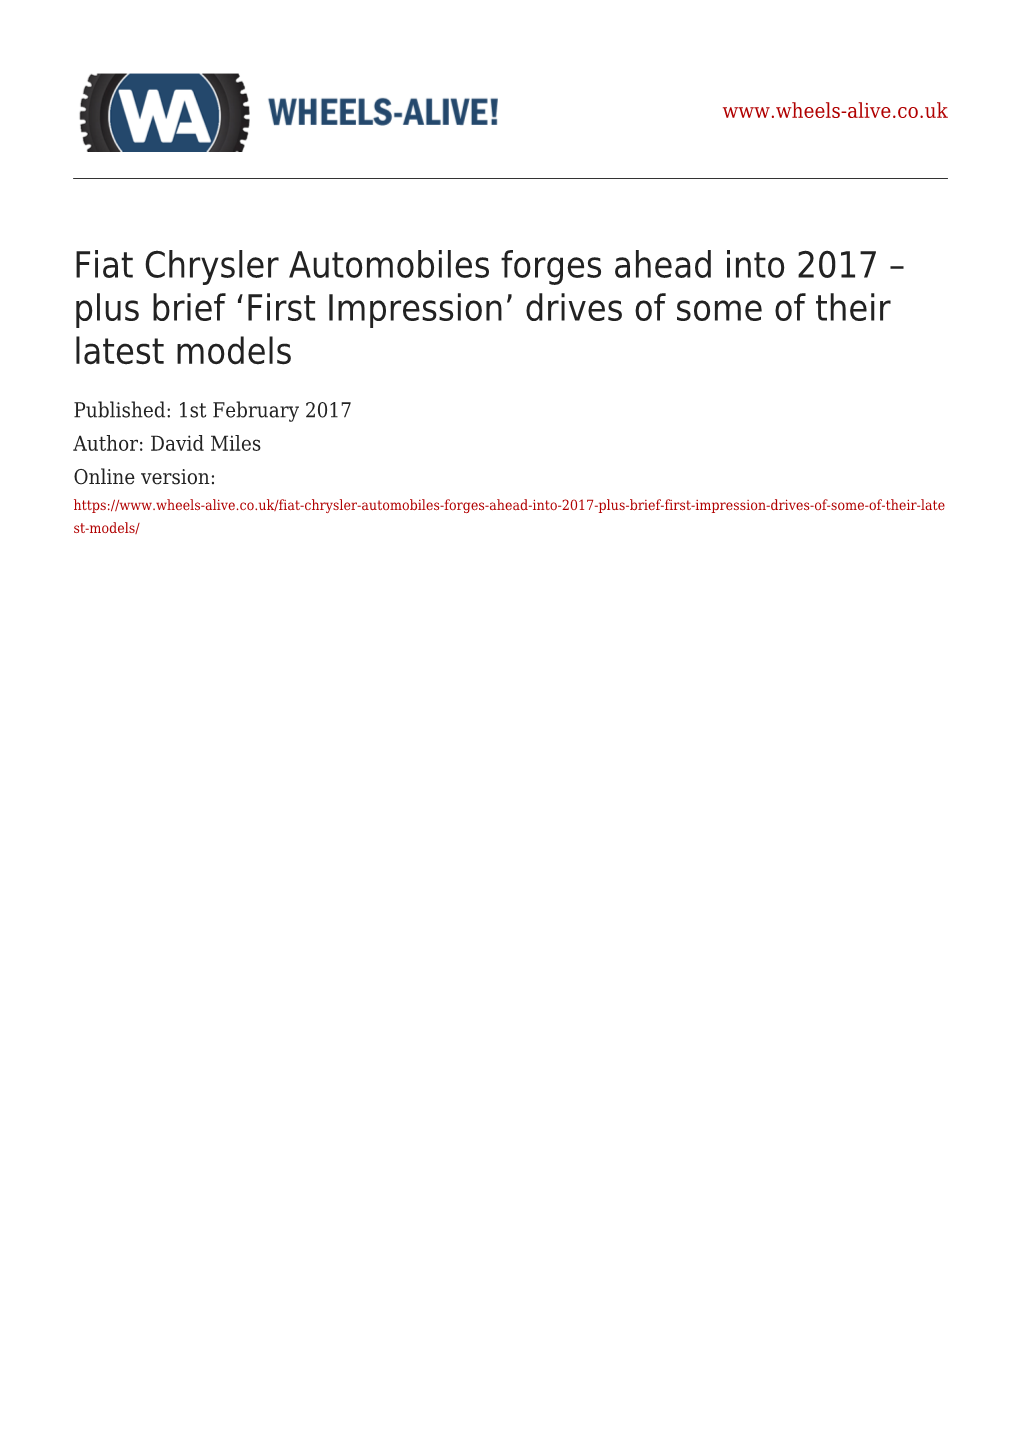 Fiat Chrysler Automobiles Forges Ahead Into 2017 – Plus Brief ‘First Impression’ Drives of Some of Their Latest Models